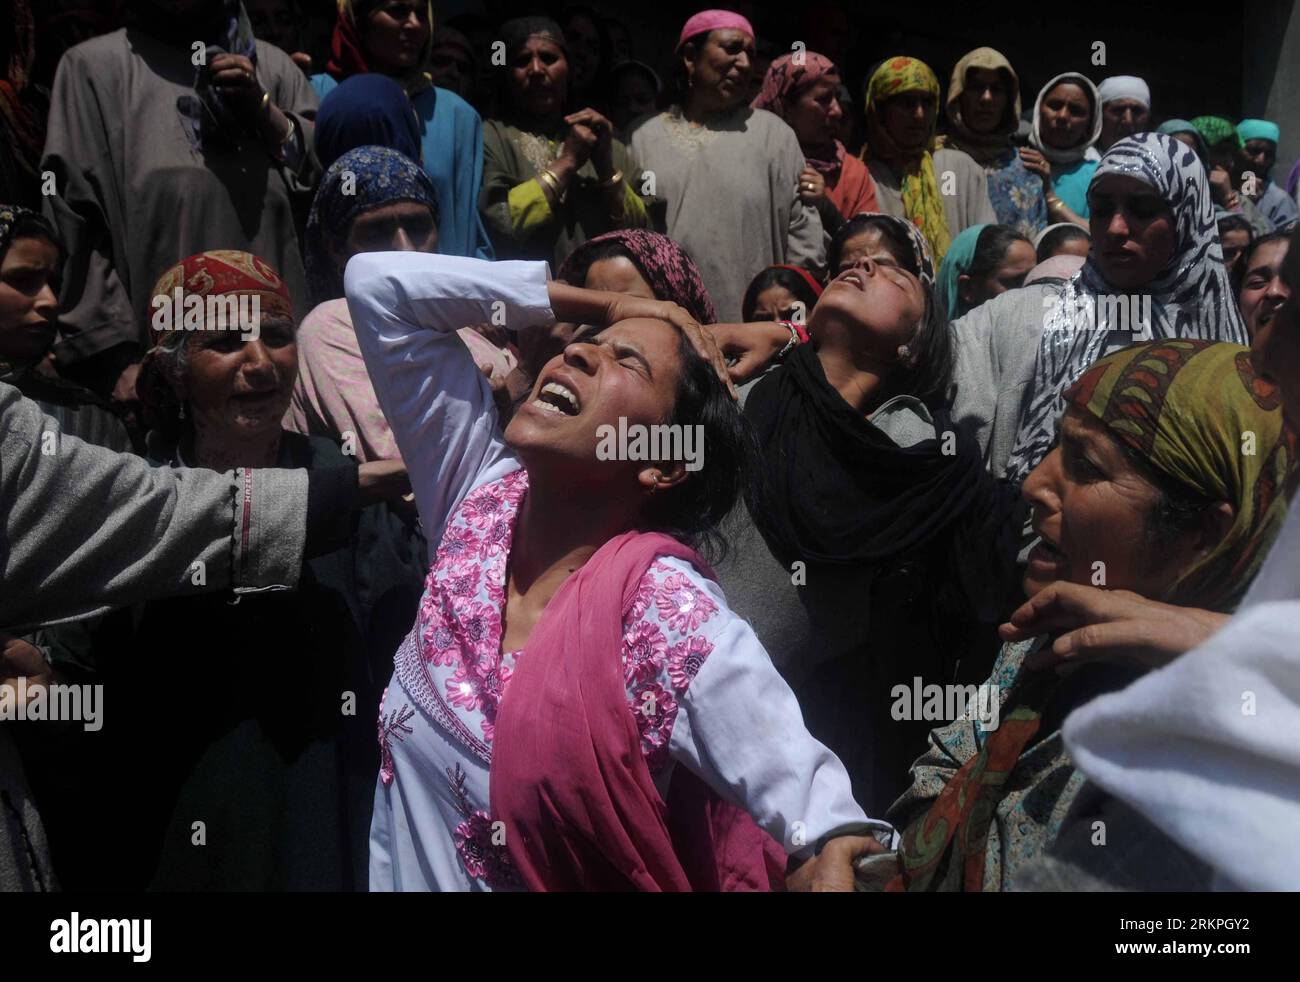 Bildnummer: 57995575  Datum: 16.05.2012  Copyright: imago/Xinhua (120516) -- SRINAGAR, May 16, 2012 (Xinhua) -- Relatives wail over the death of Nazir Ahmad Najar during his funeral at village Surasyar in Badgam district, Srinagar, summer capital of Indian-controlled Kashmir, May 16, 2012. Two persons were killed and 37 injured when the bus skidded off the road and fell into a gorge. Deadly road accidents in Indian-controlled Kashmir are often caused by overloading the vehicles, the bad condition of roads and reckless driving. (Xinhua /Javed Dar) (zyw) INDIA-KASHMIR-SRINAGAR-ACCIDENT PUBLICATI Stock Photo